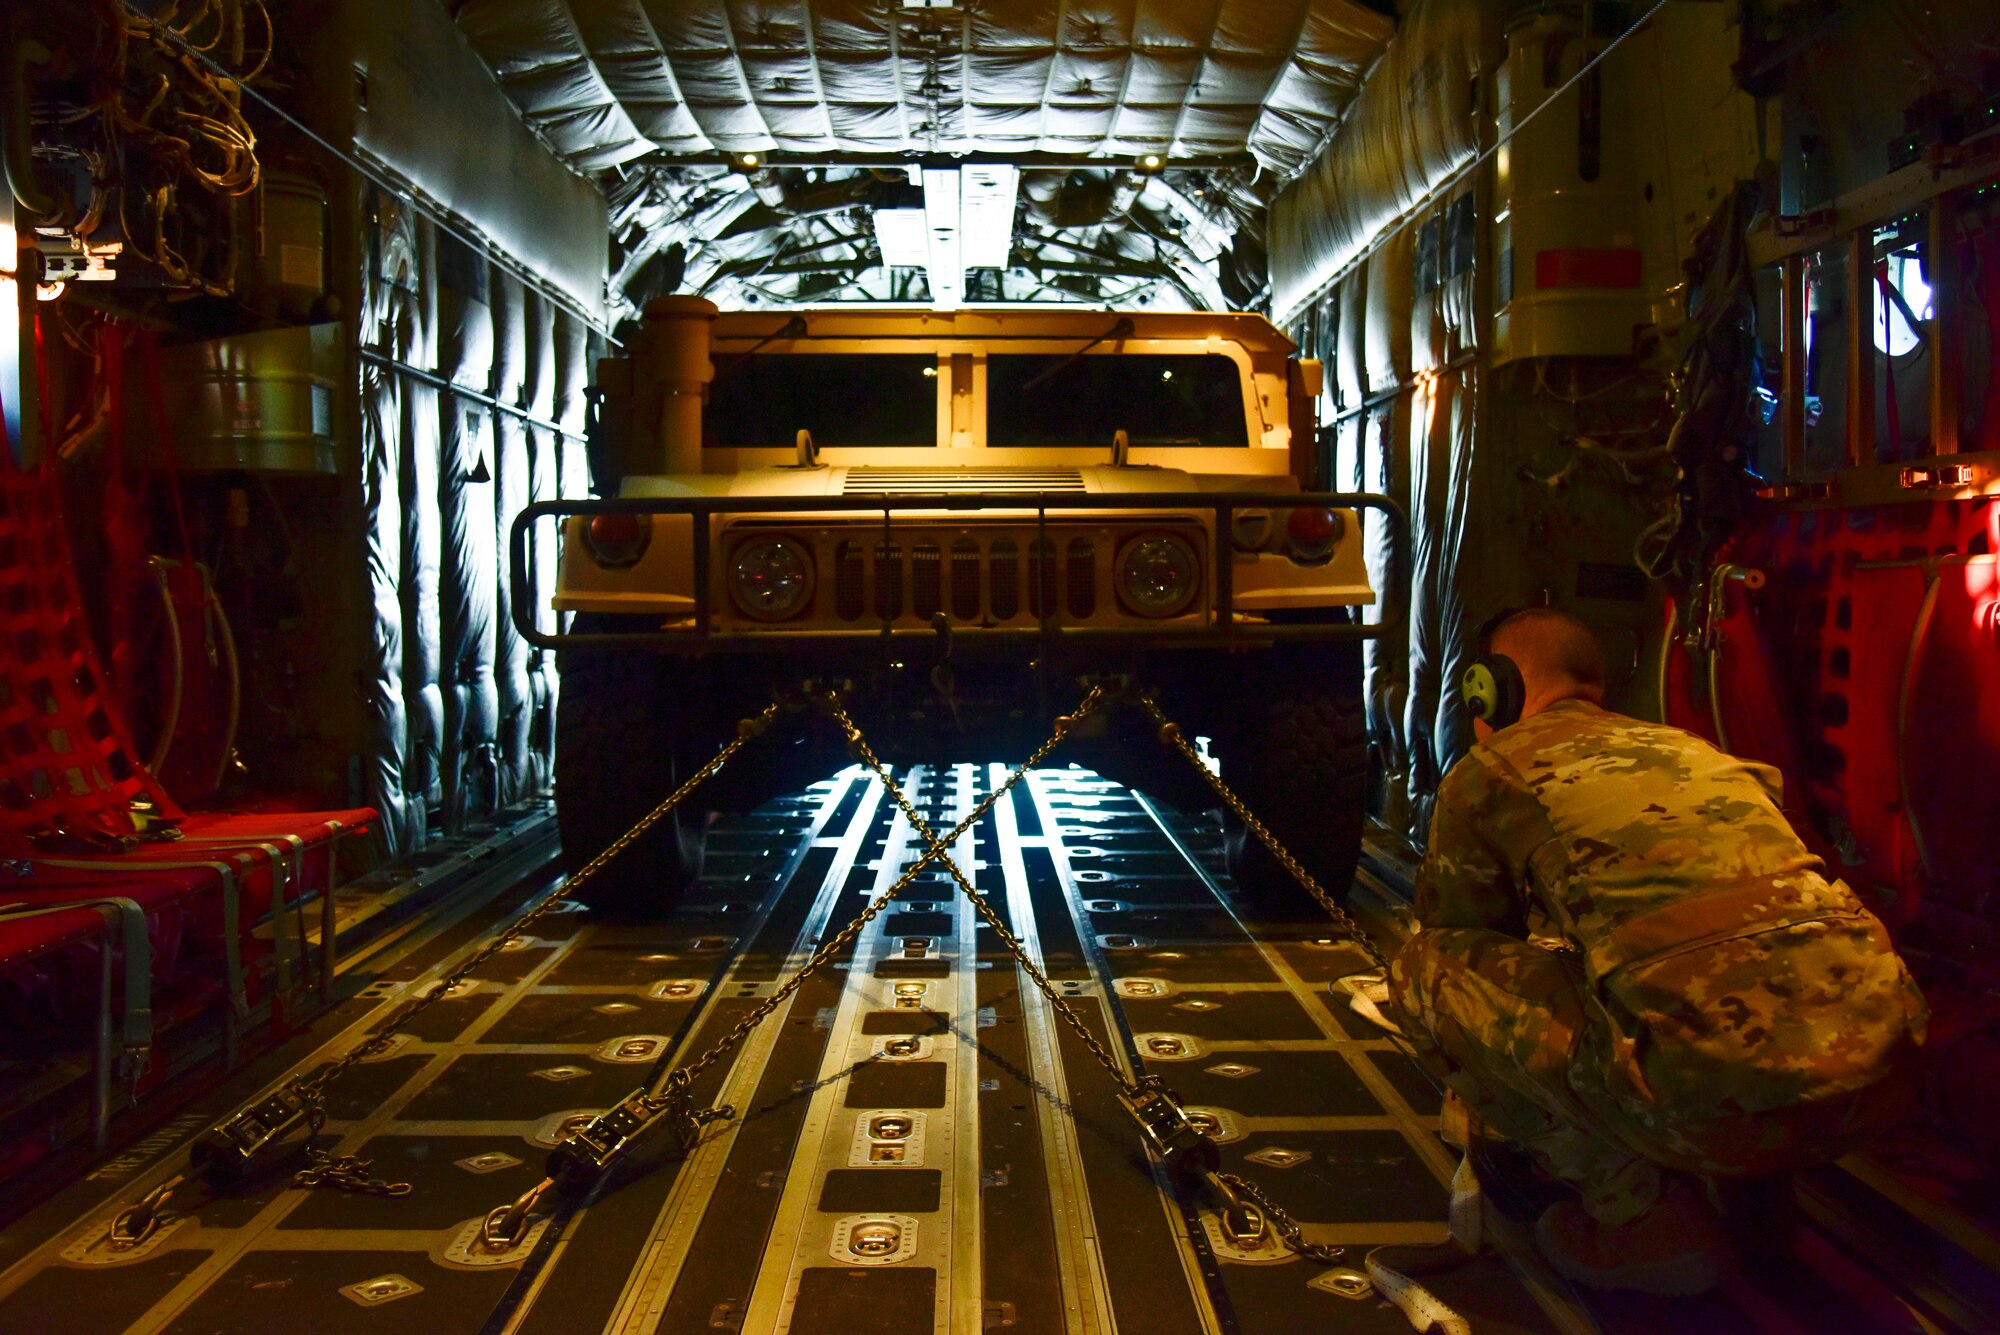 U.S. Air Force Reserve Senior Airman Richard Brewster, 327th Airlift Squadron loadmaster, secures a Humvee in the cargo area of a C-130J Super Hercules at an airport near Salina, Kansas, May 12, 2021. The Air Force Reserve 327th Airlift Squadron provided agile combat support and cargo handling training opportunities to the 442d Fighter Wing's training event. (U.S. Air Force photo by Senior Airman Kalee Sexton)